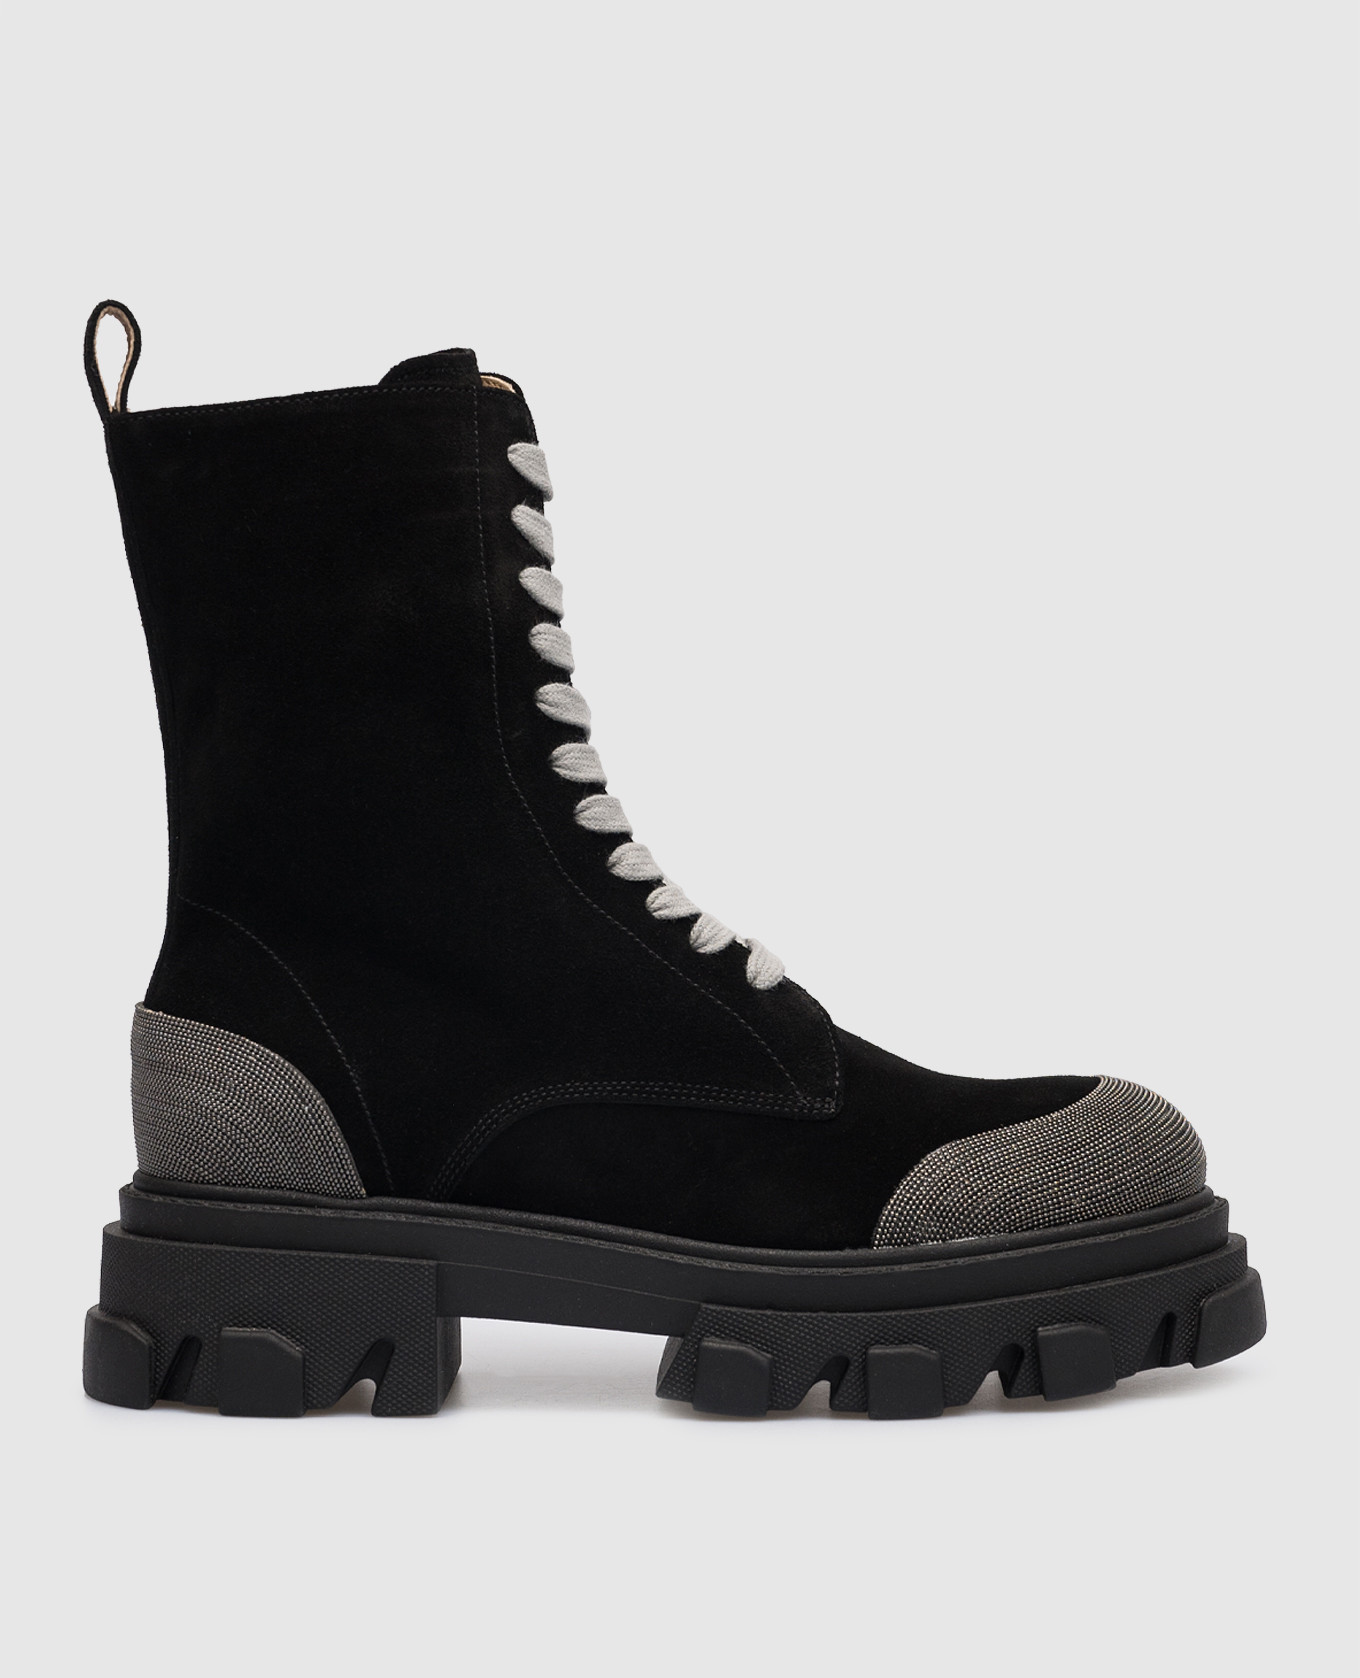 Black suede boots with monil chain